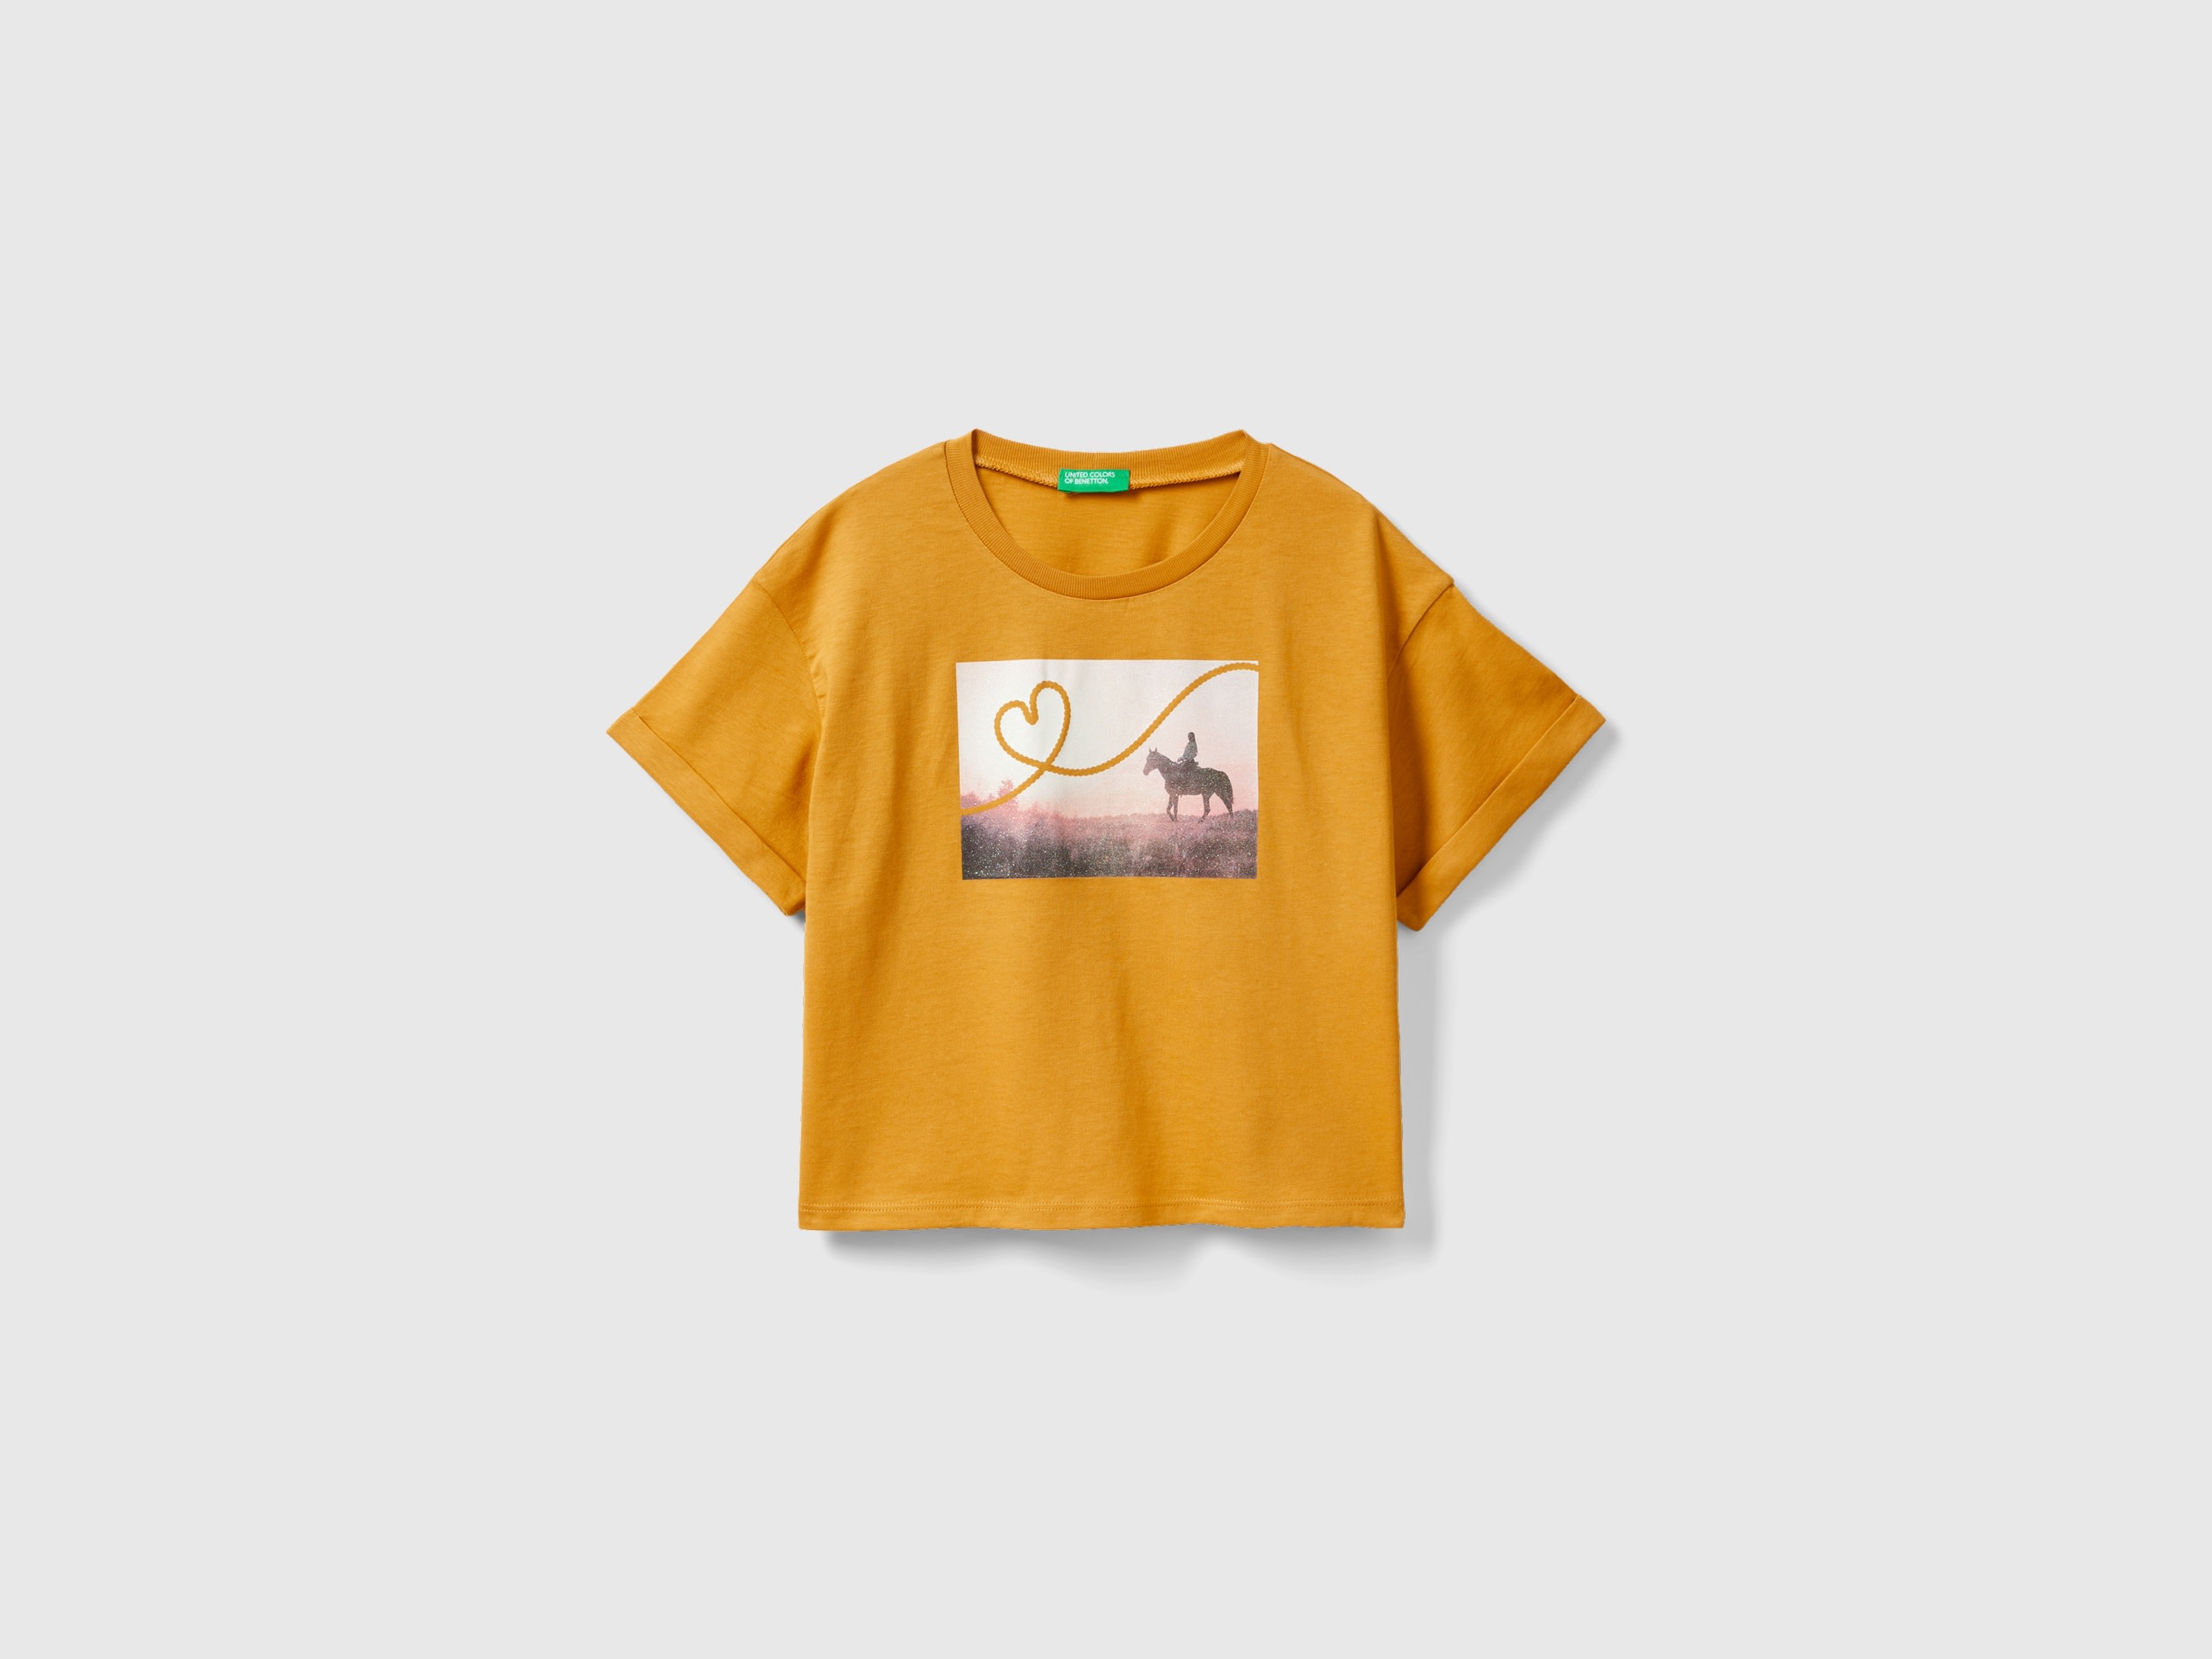 Image of Benetton, T-shirt With Photographic Horse Print, size 2XL, Mustard, Kids